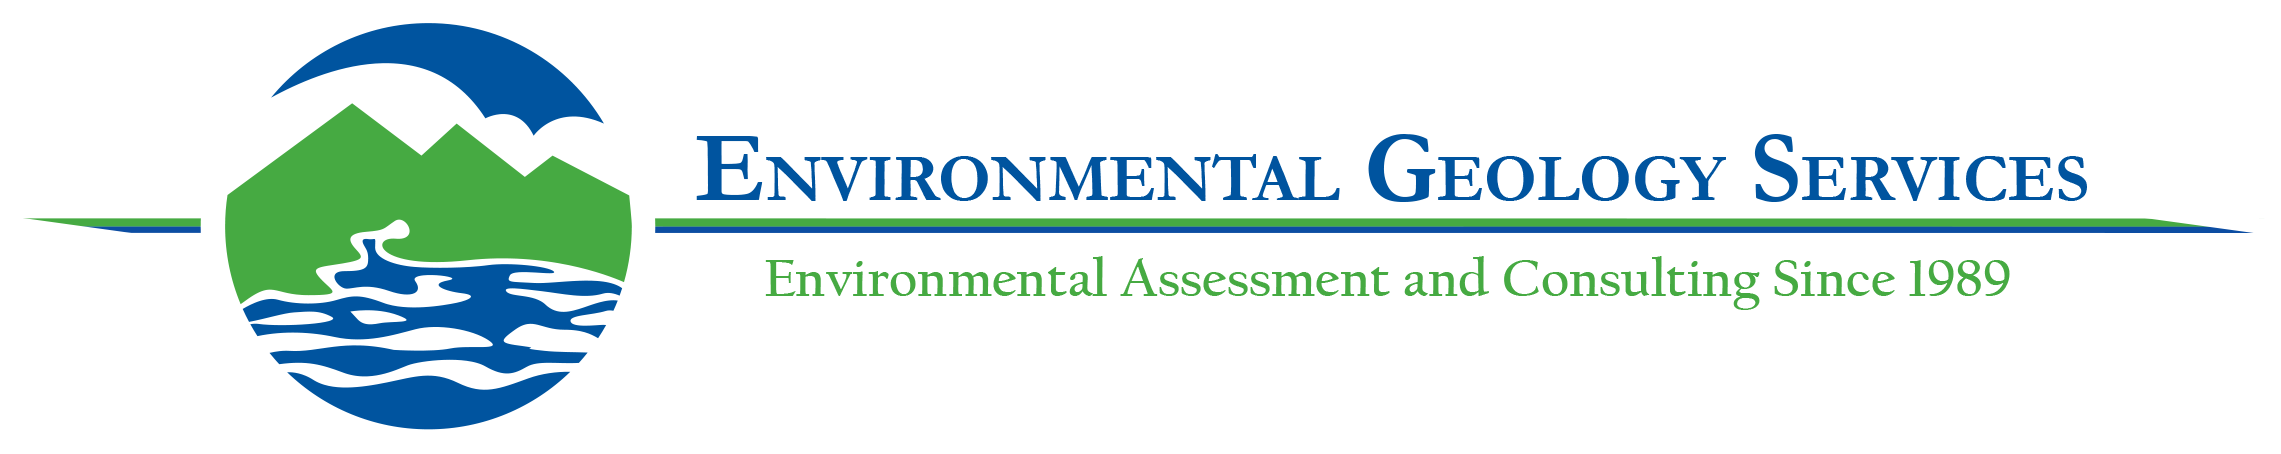 Environmental Geology Services